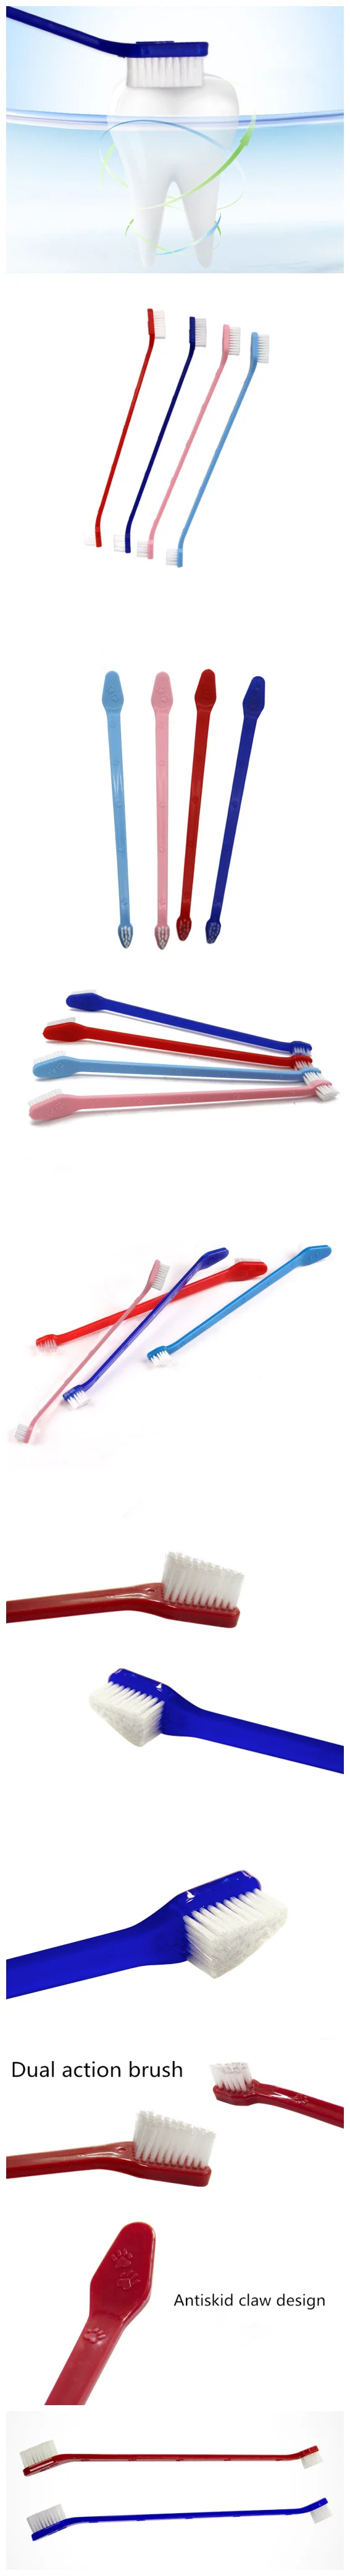 double Dog ToothBrush.png